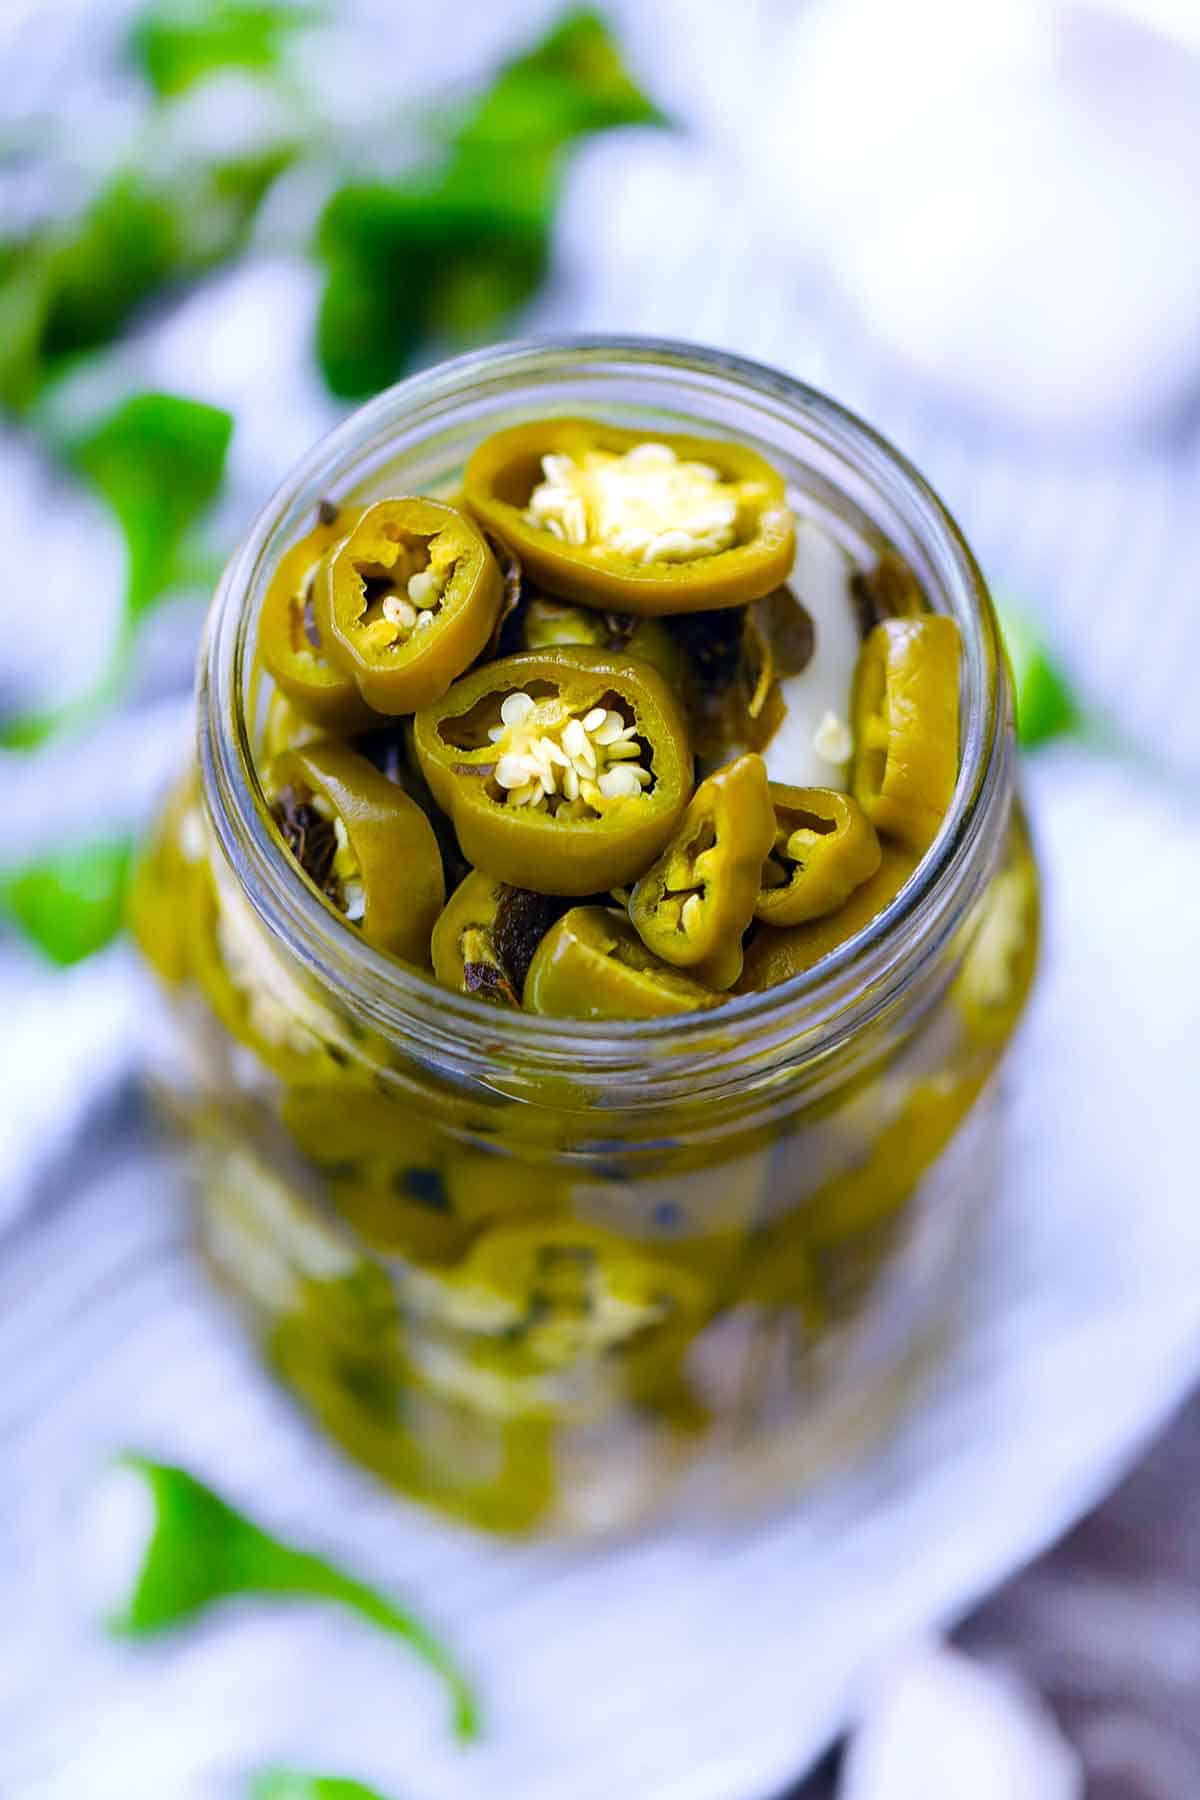 View from above of an open glass jar with pickled jalapeño peppers inside.